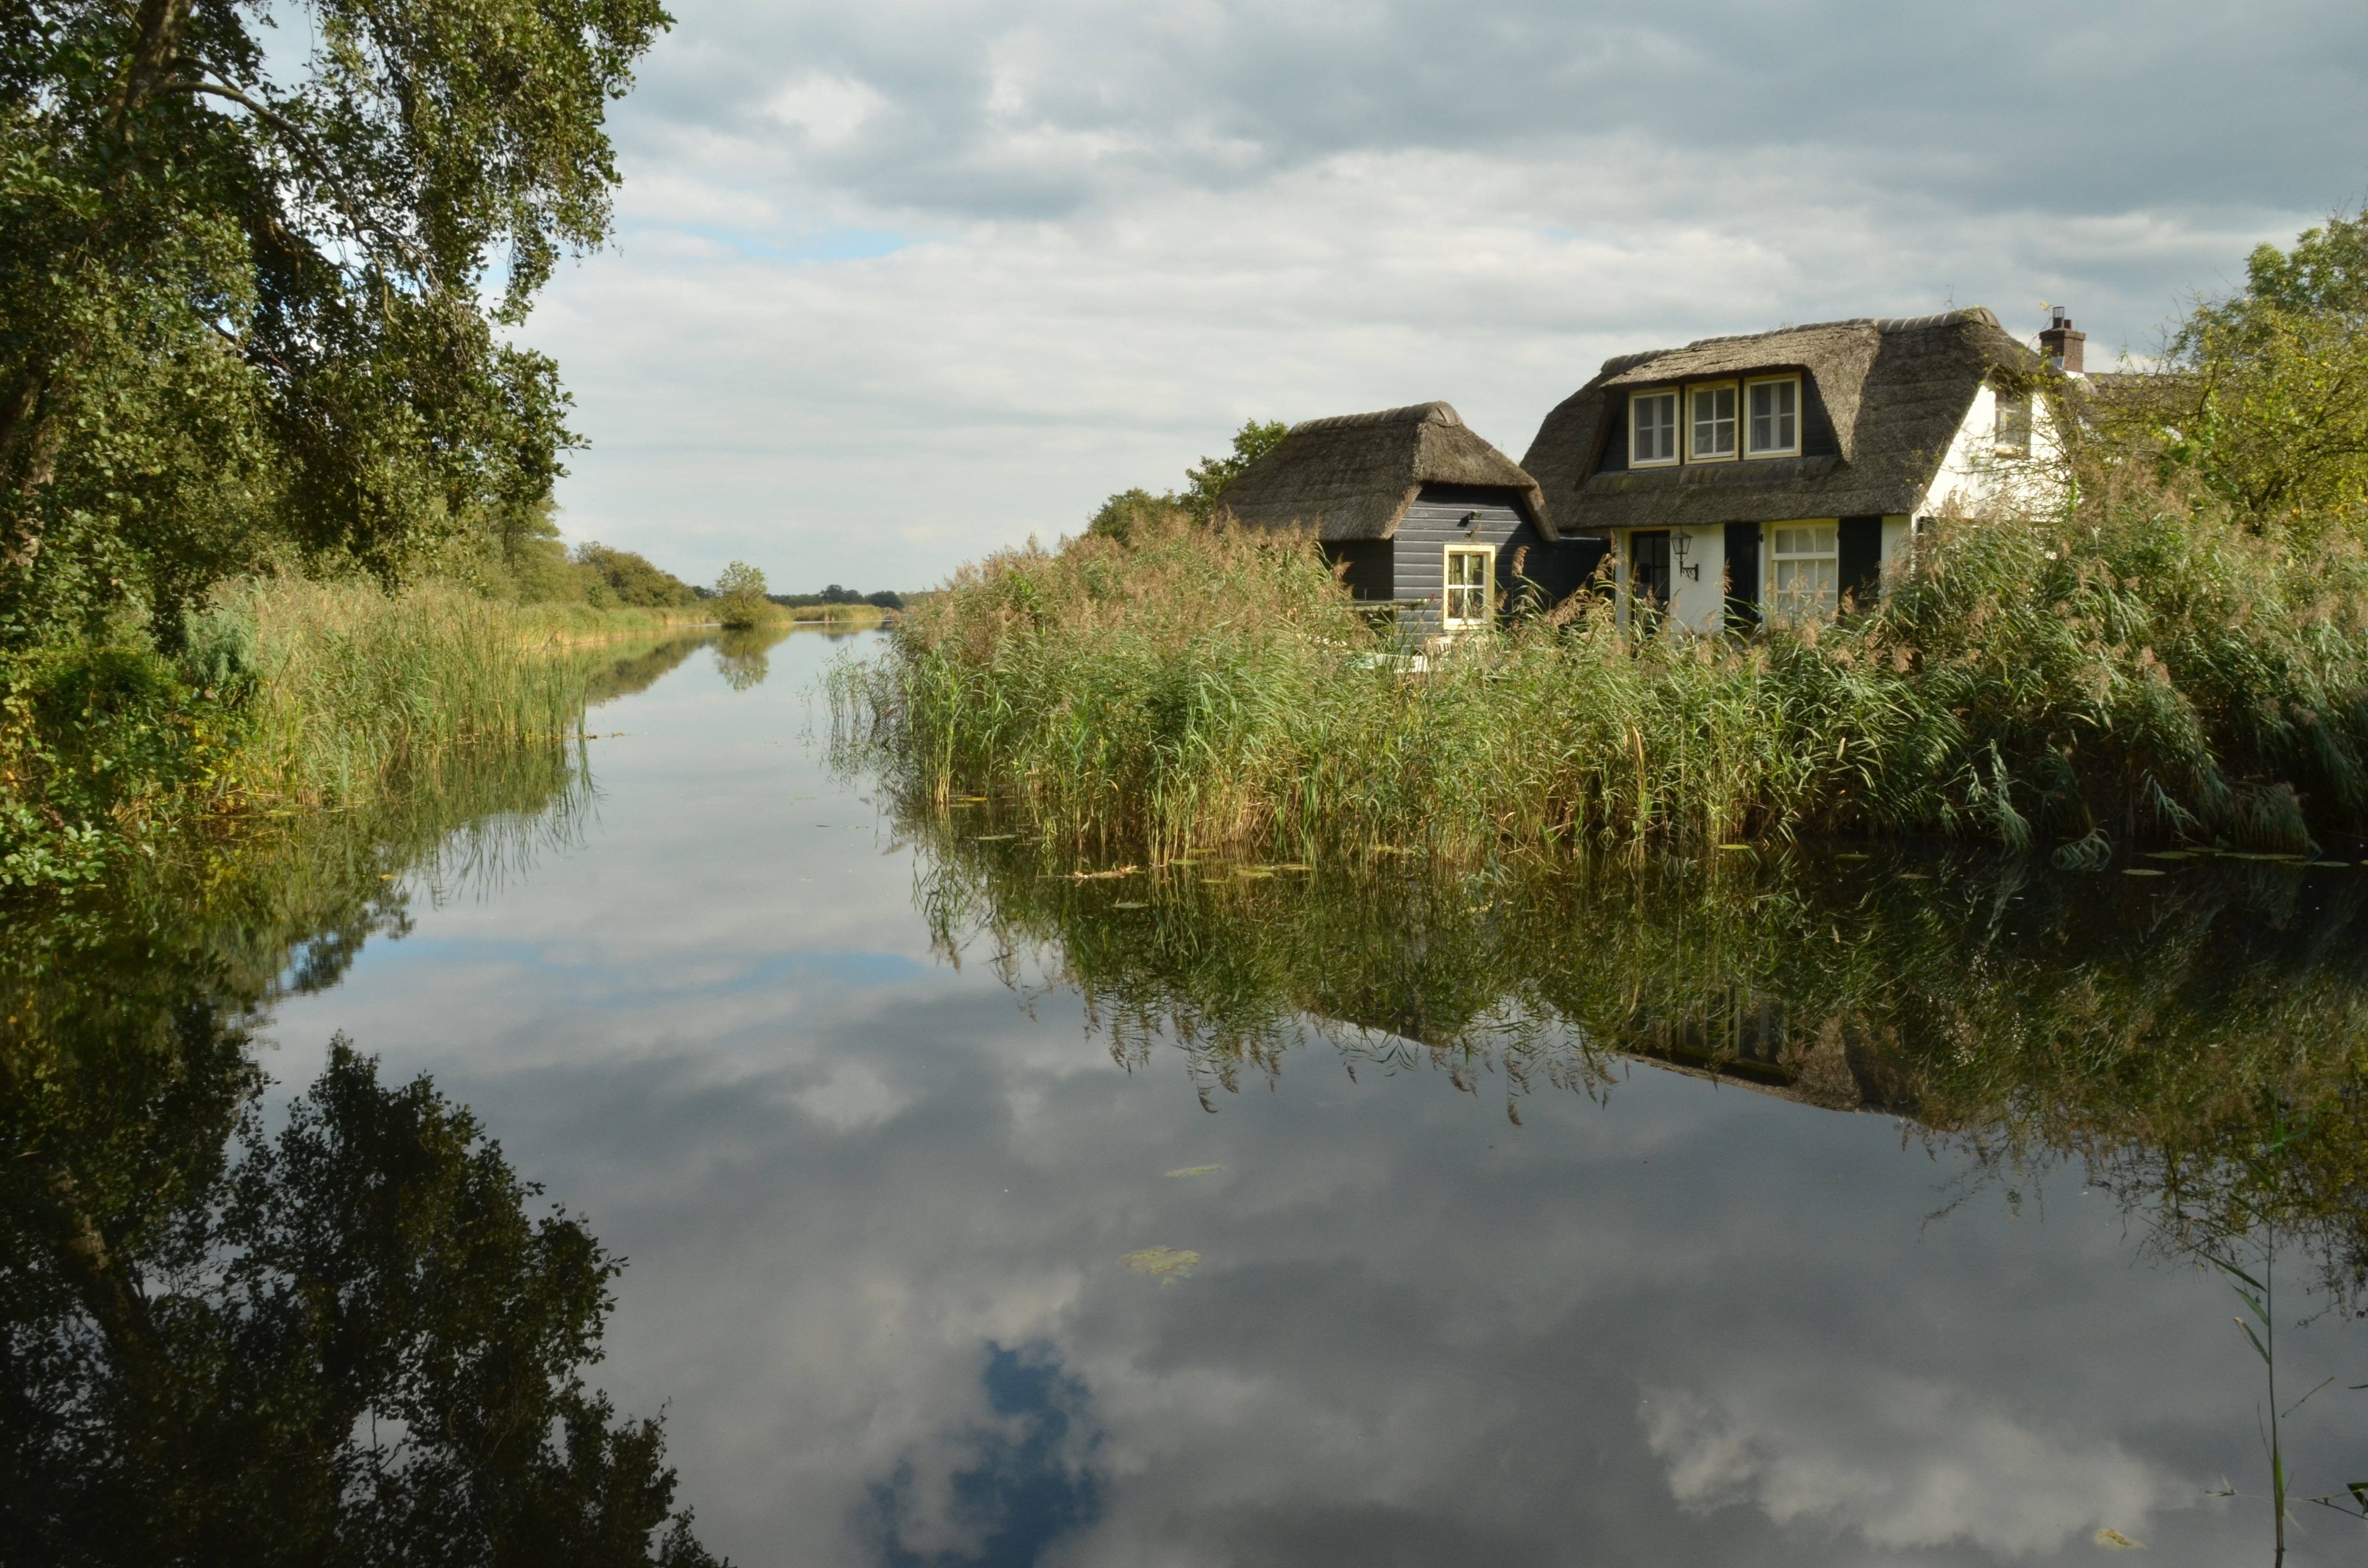 Bank, Home, Ditch, House, Water, reflection, water